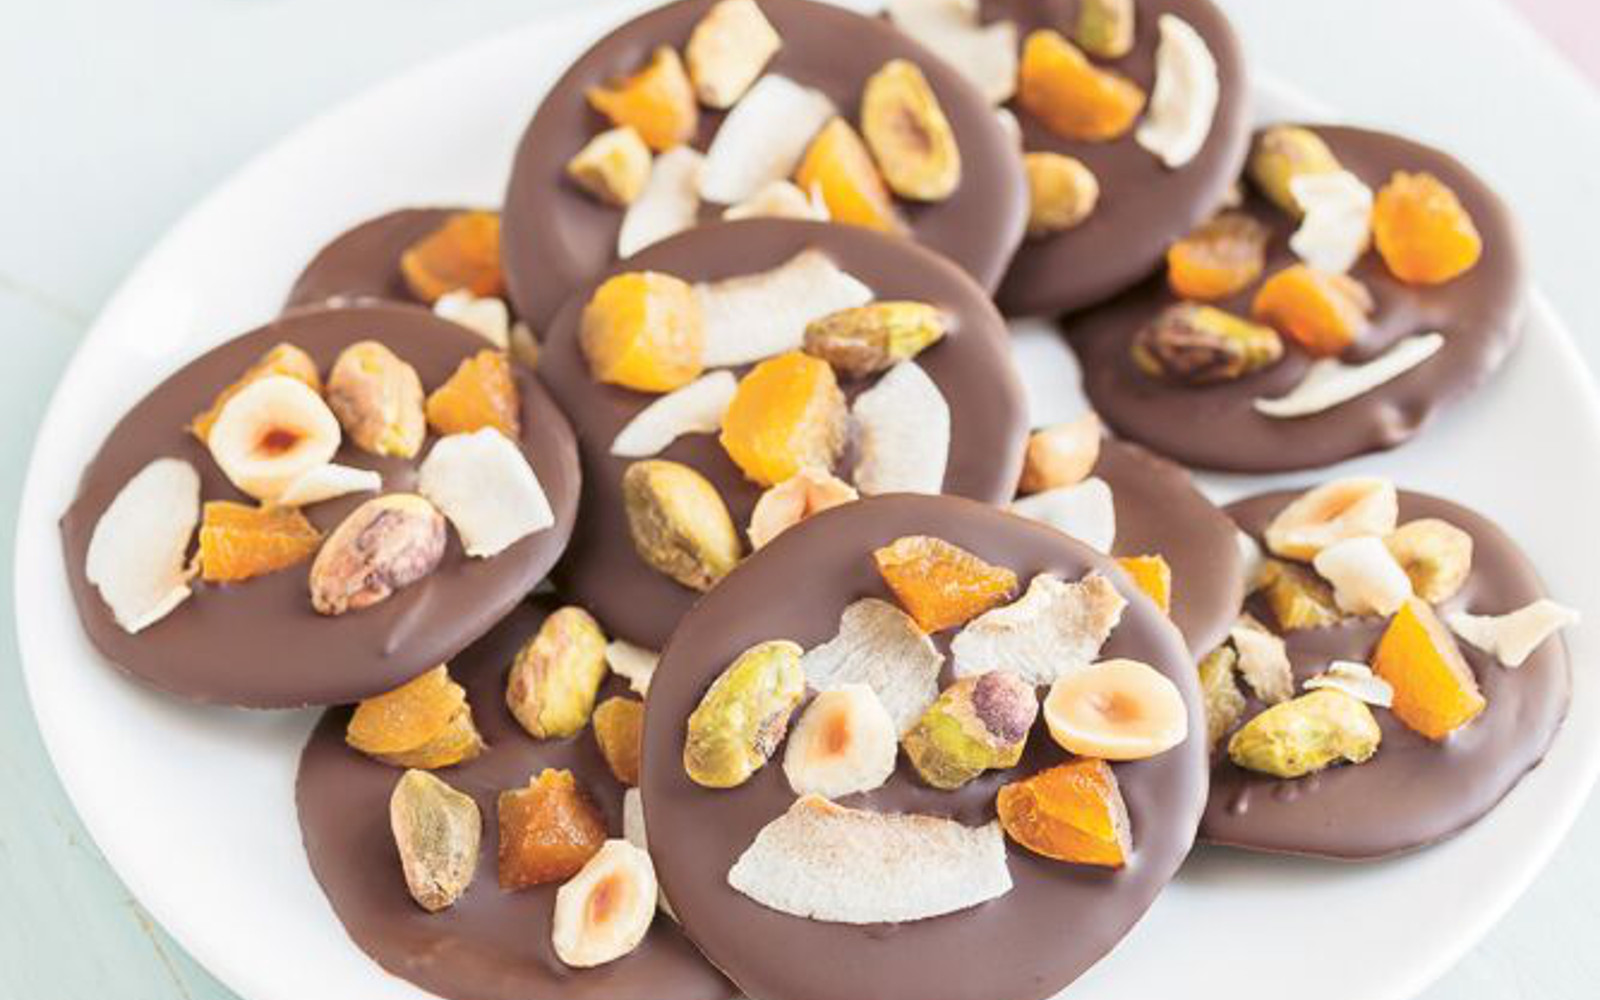 Mint Chocolate Medallions With Fruit, Nuts, and Flaked Coconut